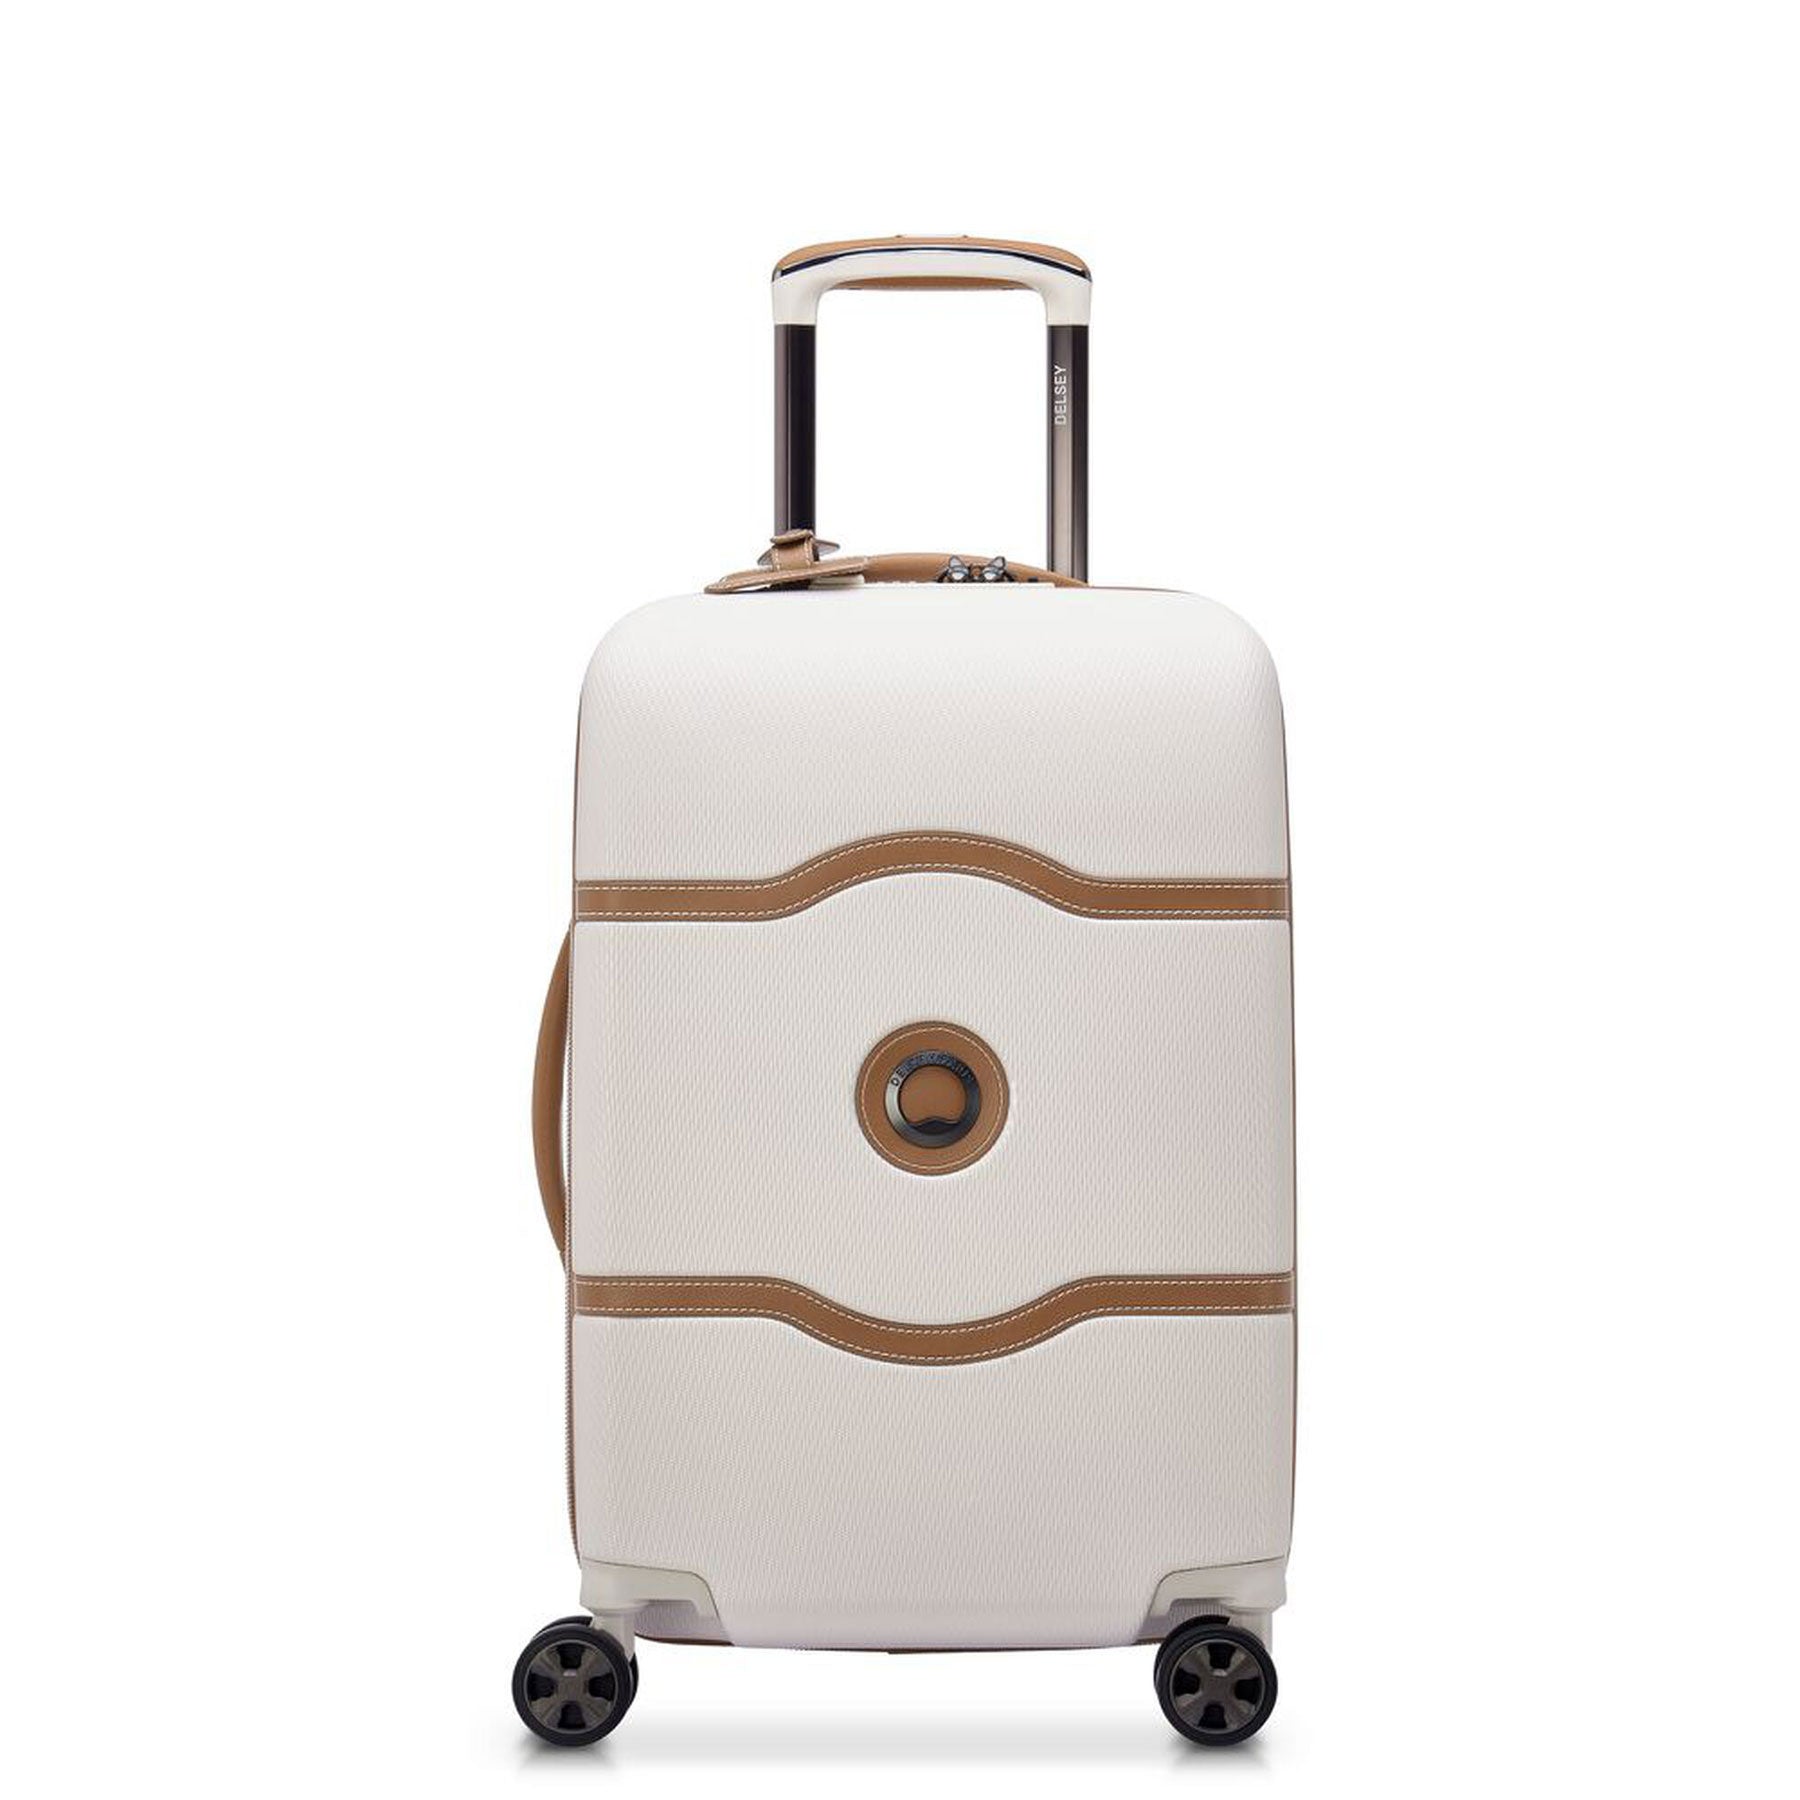 Delsey Chatelet Air 2.0 International Carry-on Spinner Upright